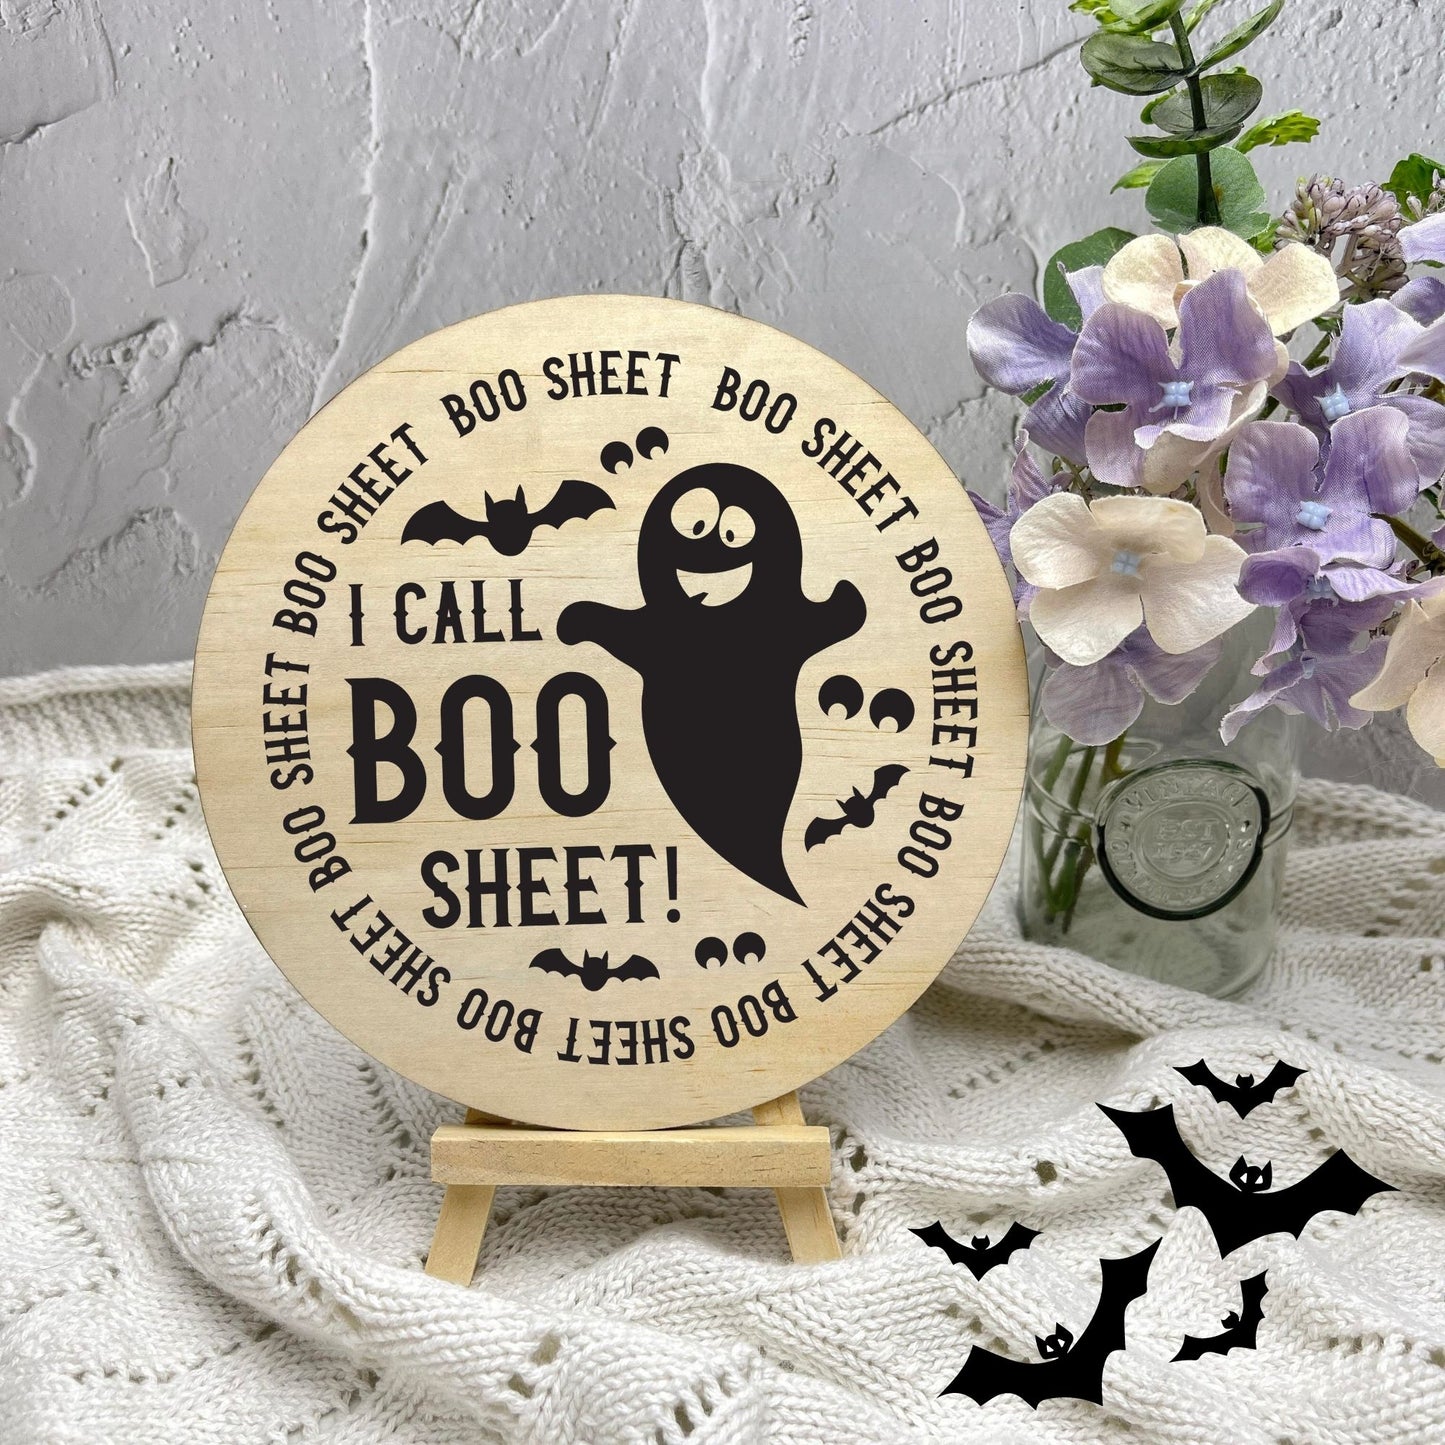 I call boo sheet sign, Halloween Decor, Spooky Vibes, hocus pocus sign, trick or treat decor, haunted house h23